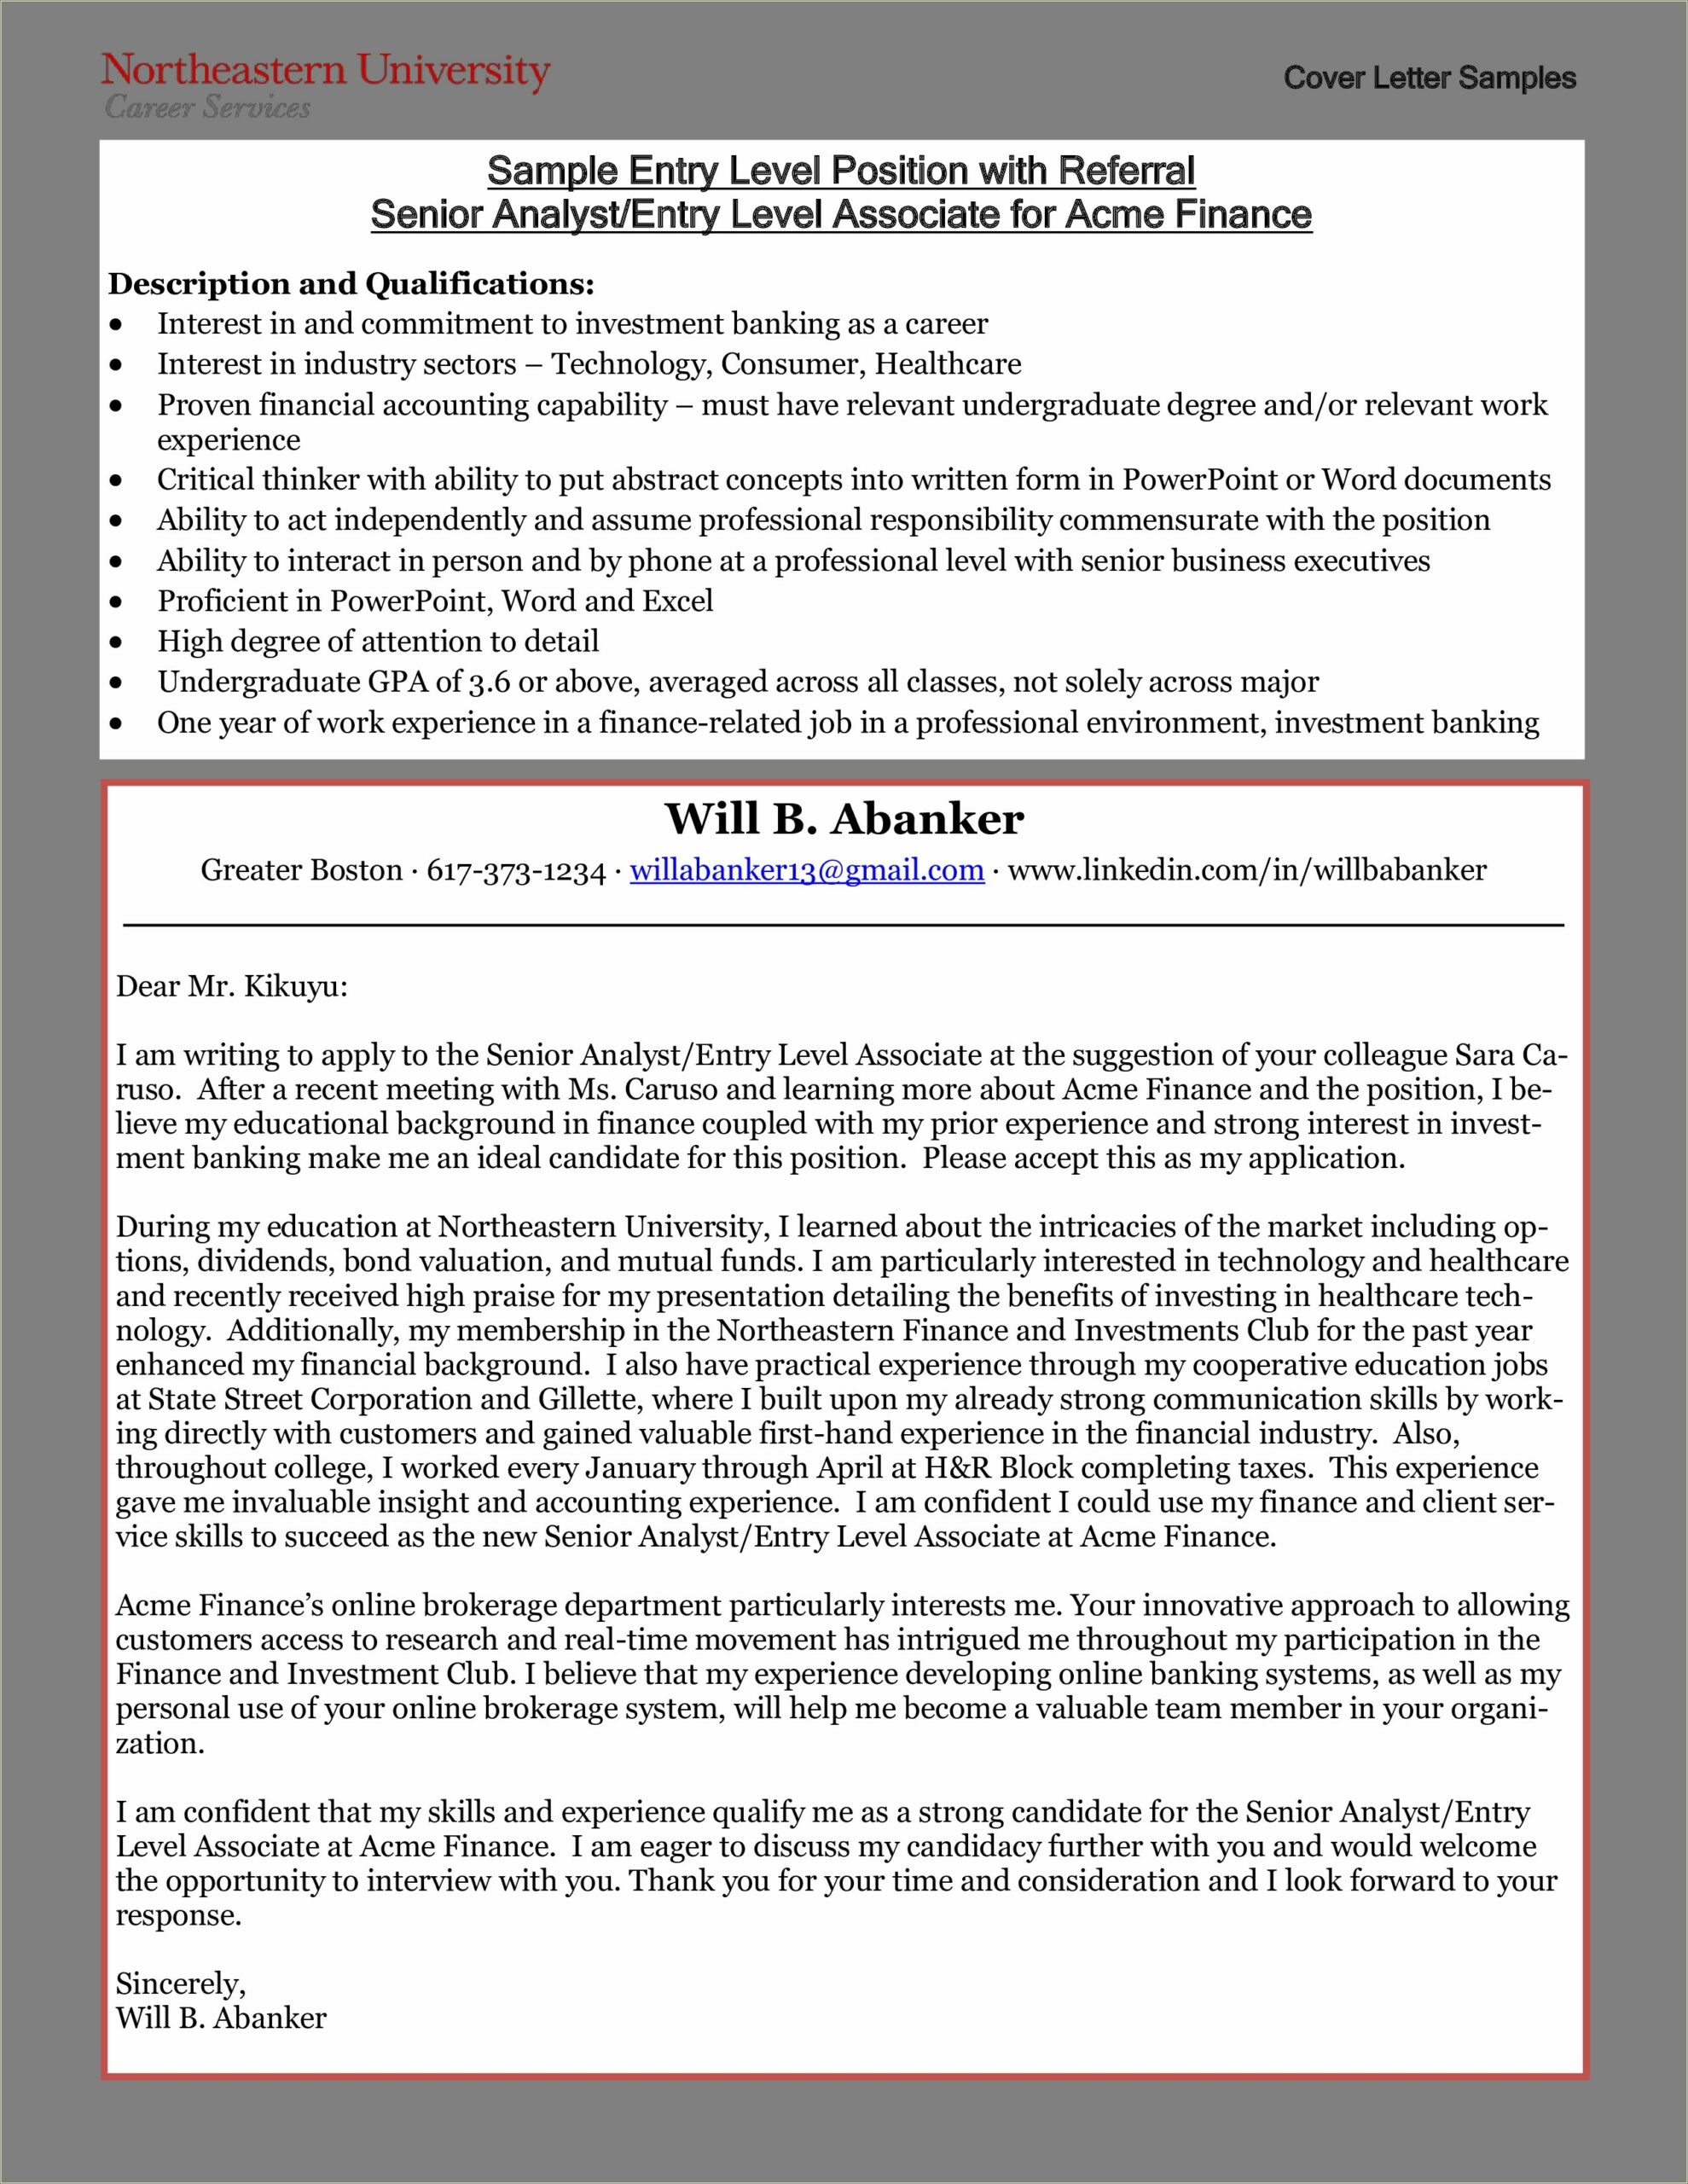 Resume Cover Letter Samples For Business Analysts